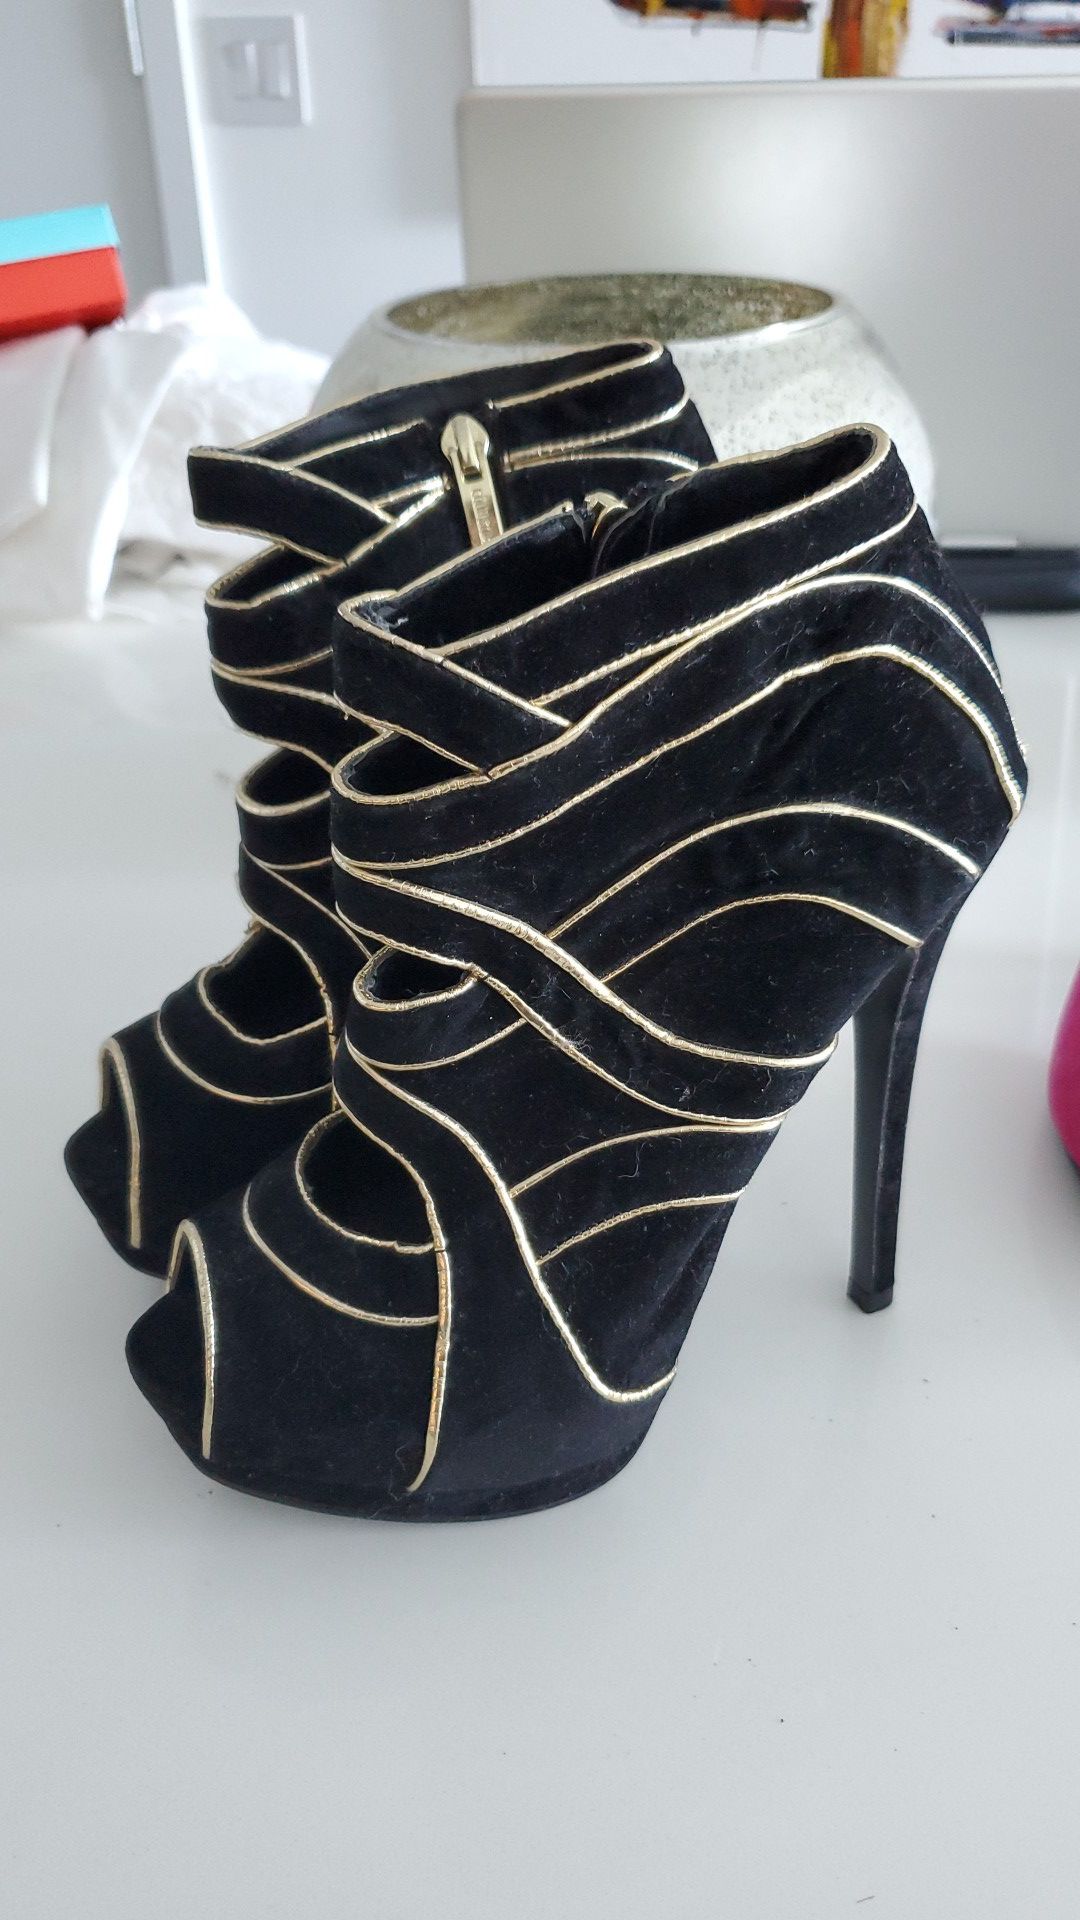 Brand new Black suede with gold heels size 6 women's